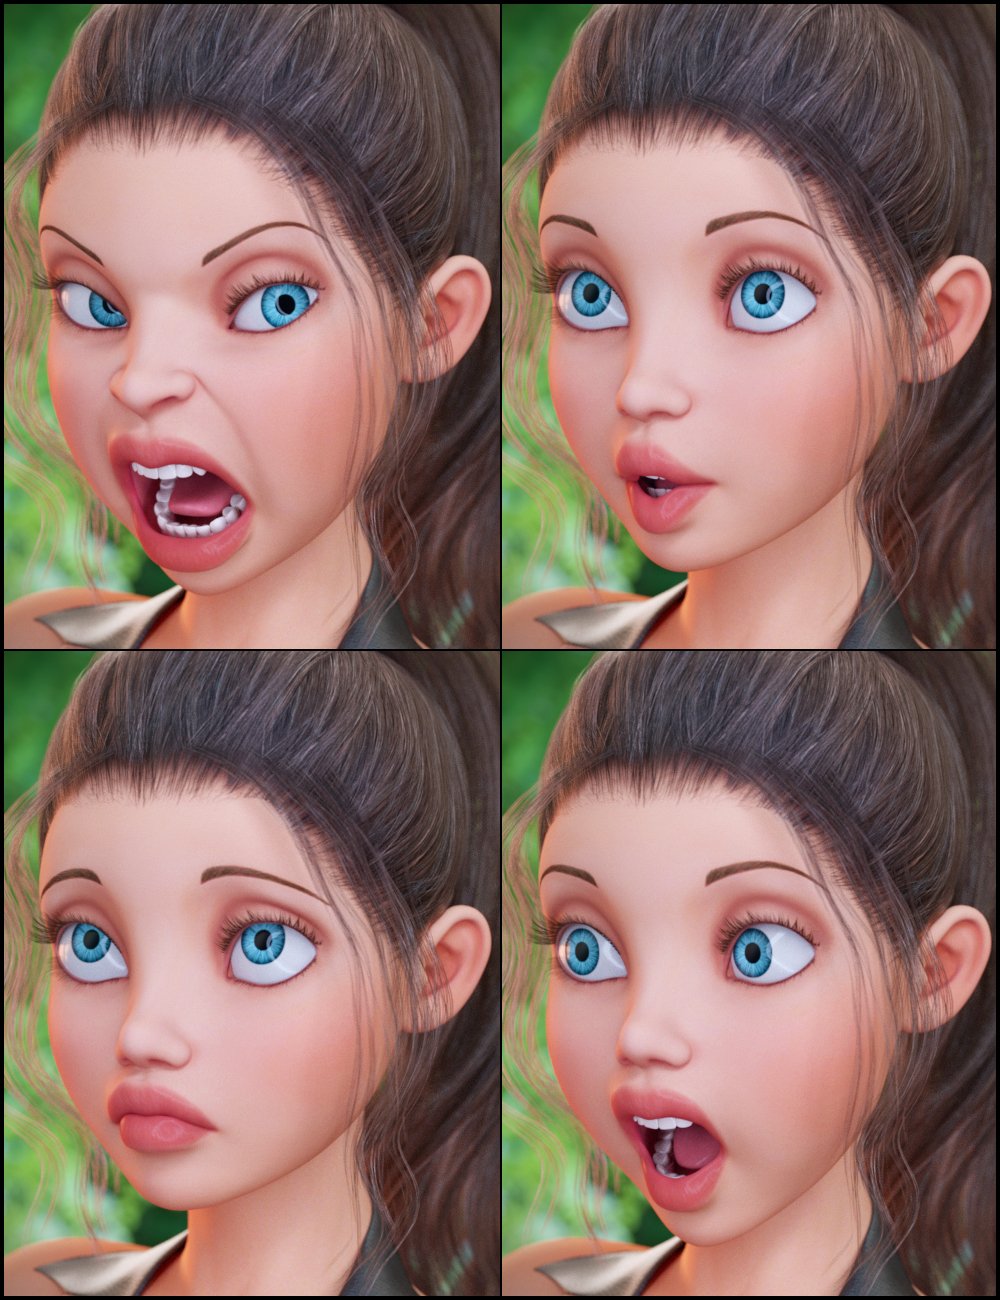 Capsces Tooned Expressions for The Girl 7 by: Capsces Digital Ink, 3D Models by Daz 3D